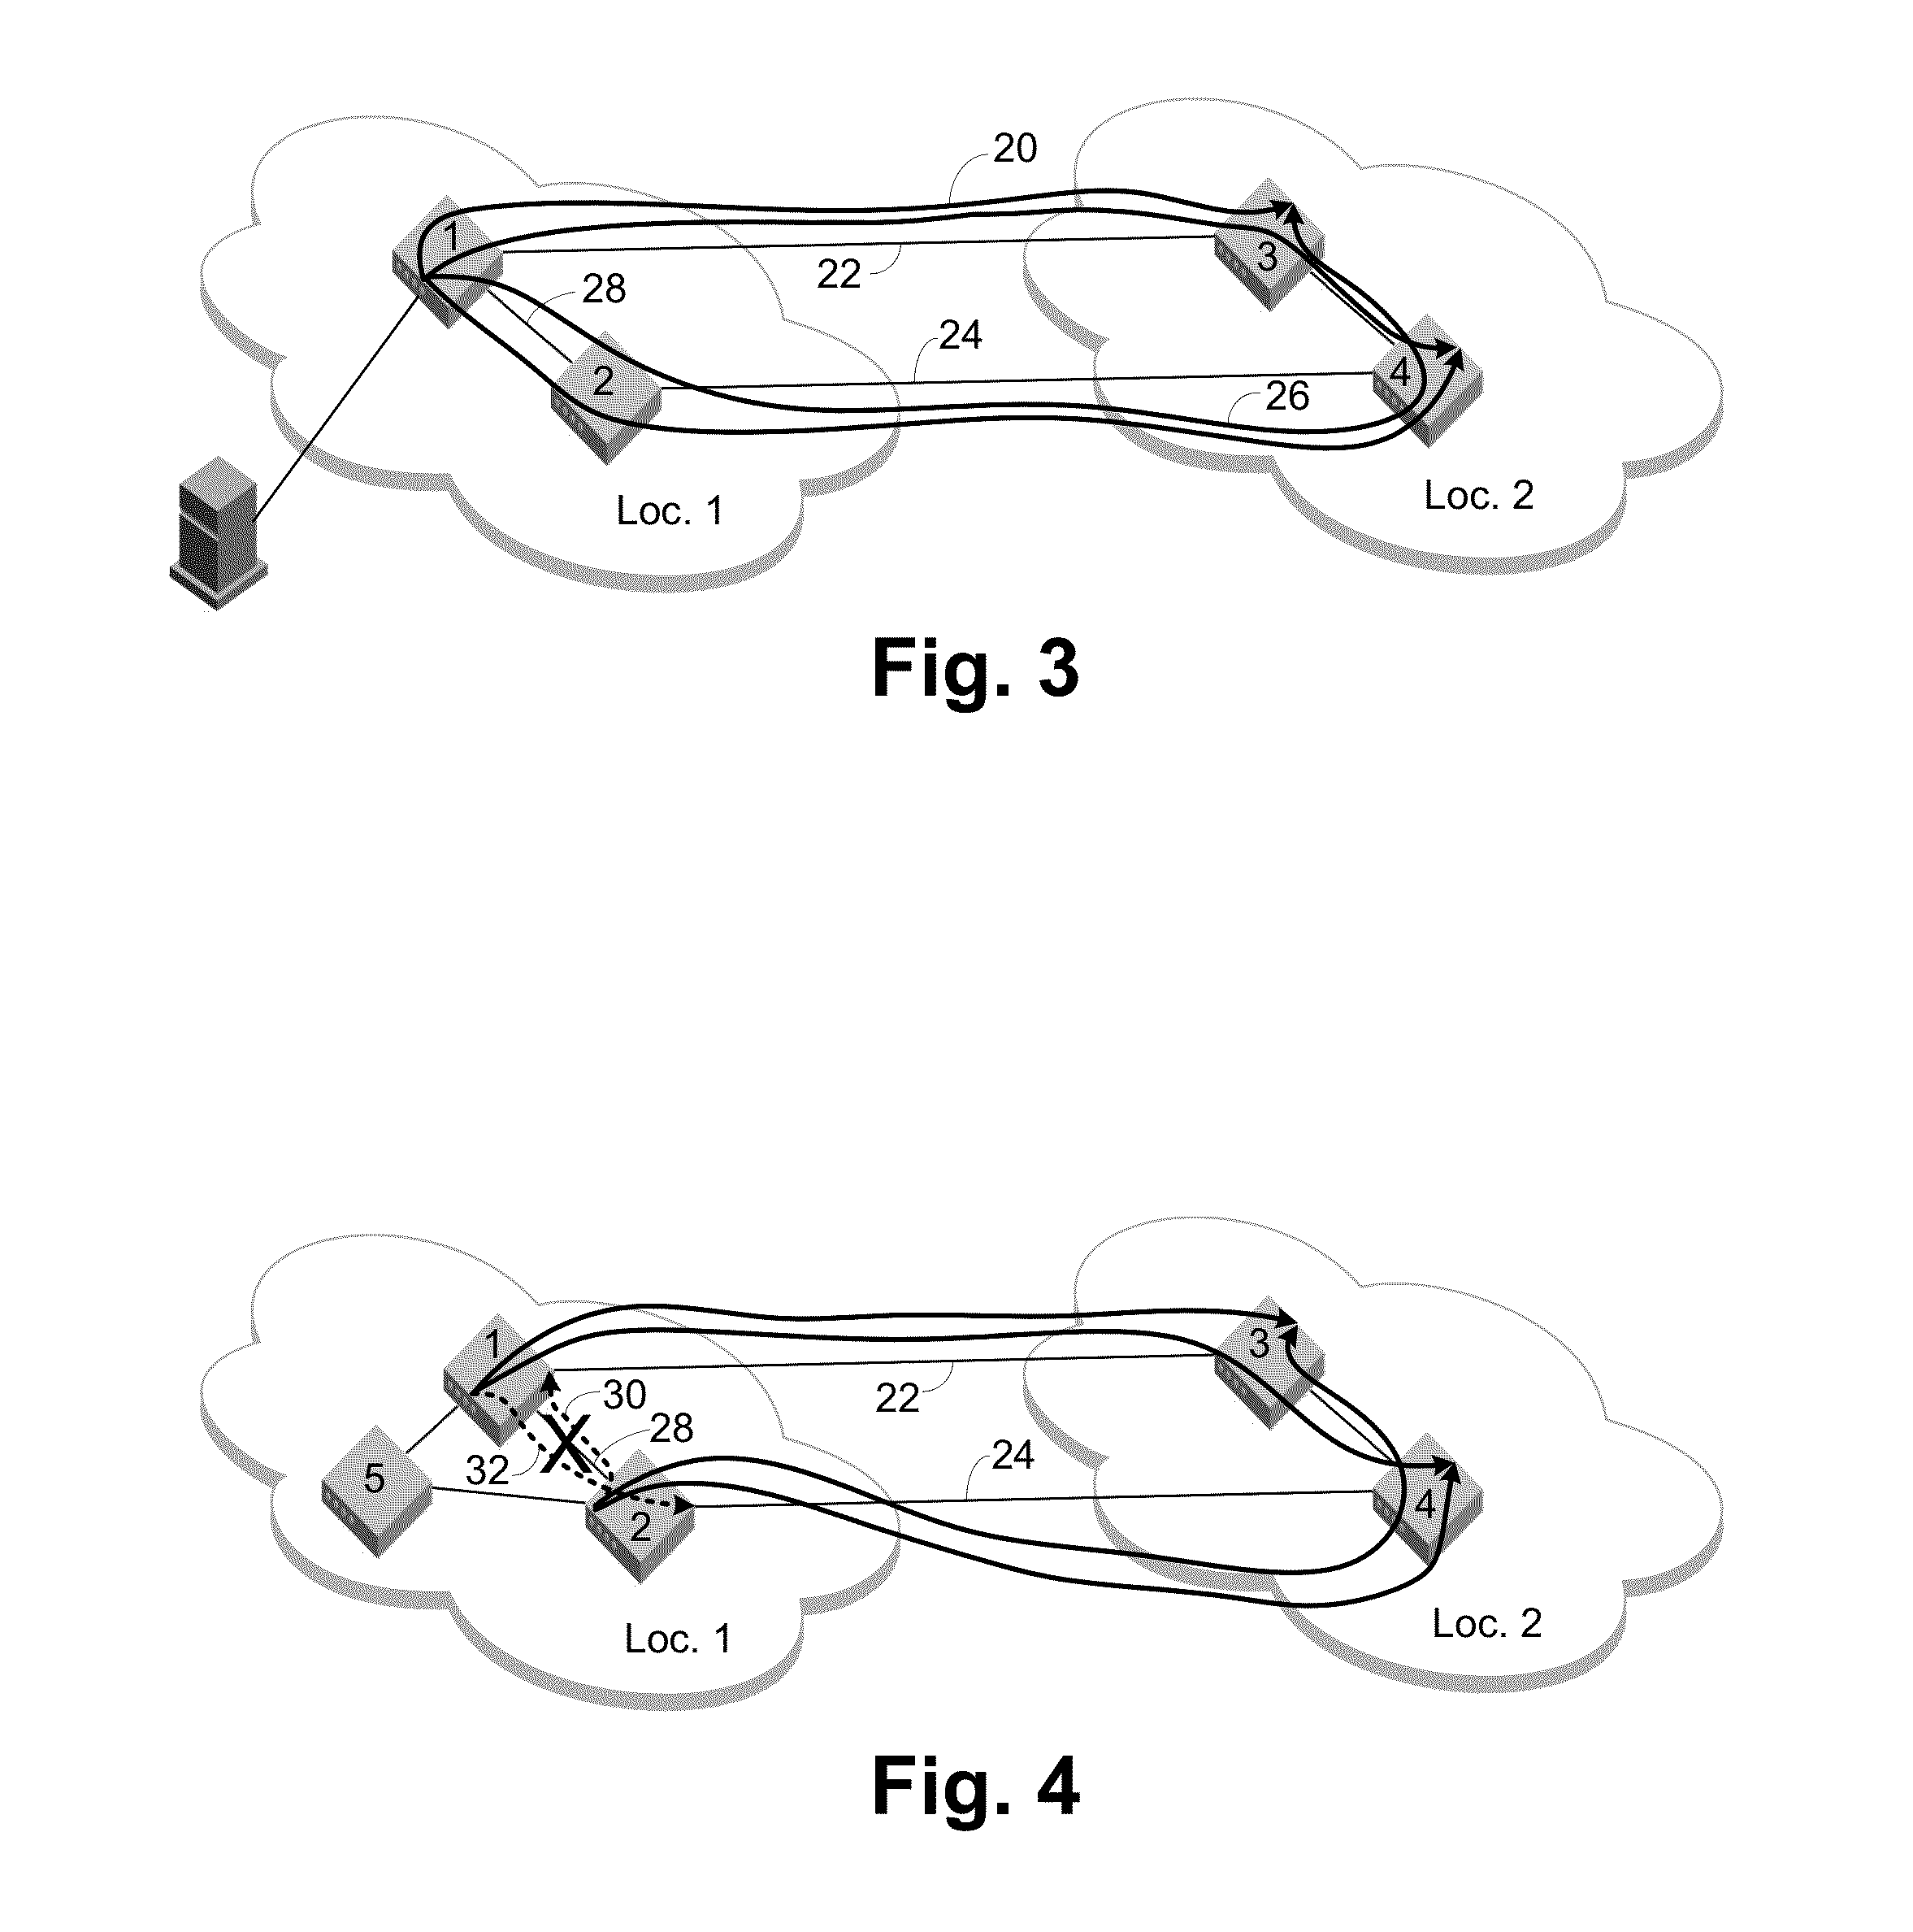 Method and Apparatus for Enhanced Routing within a Shortest Path Based Routed Network Containing Local and Long Distance Links